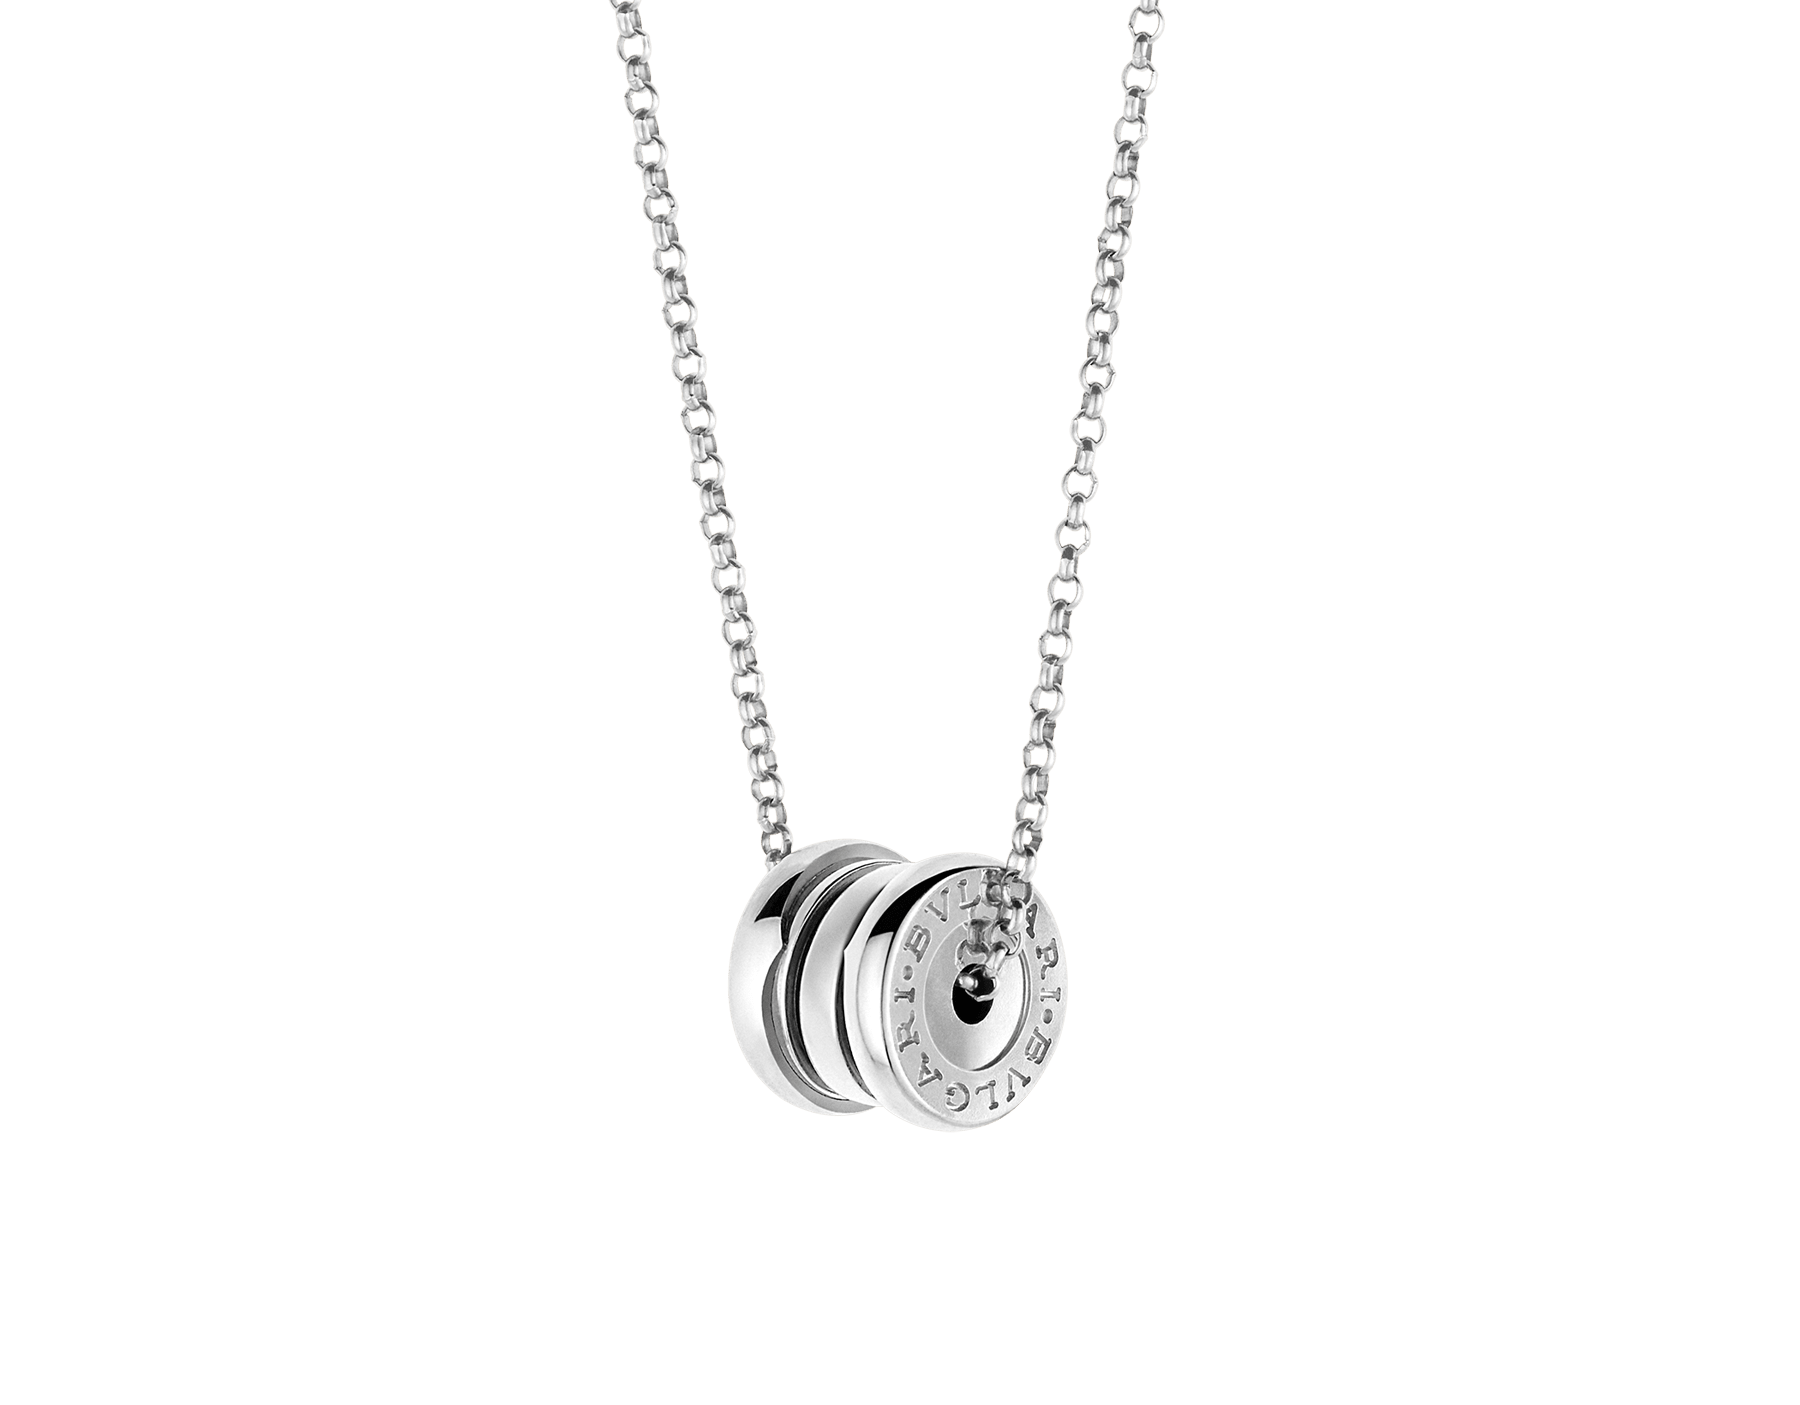 B.zero1 18 kt white gold pendant necklace with chain 360310 image 1